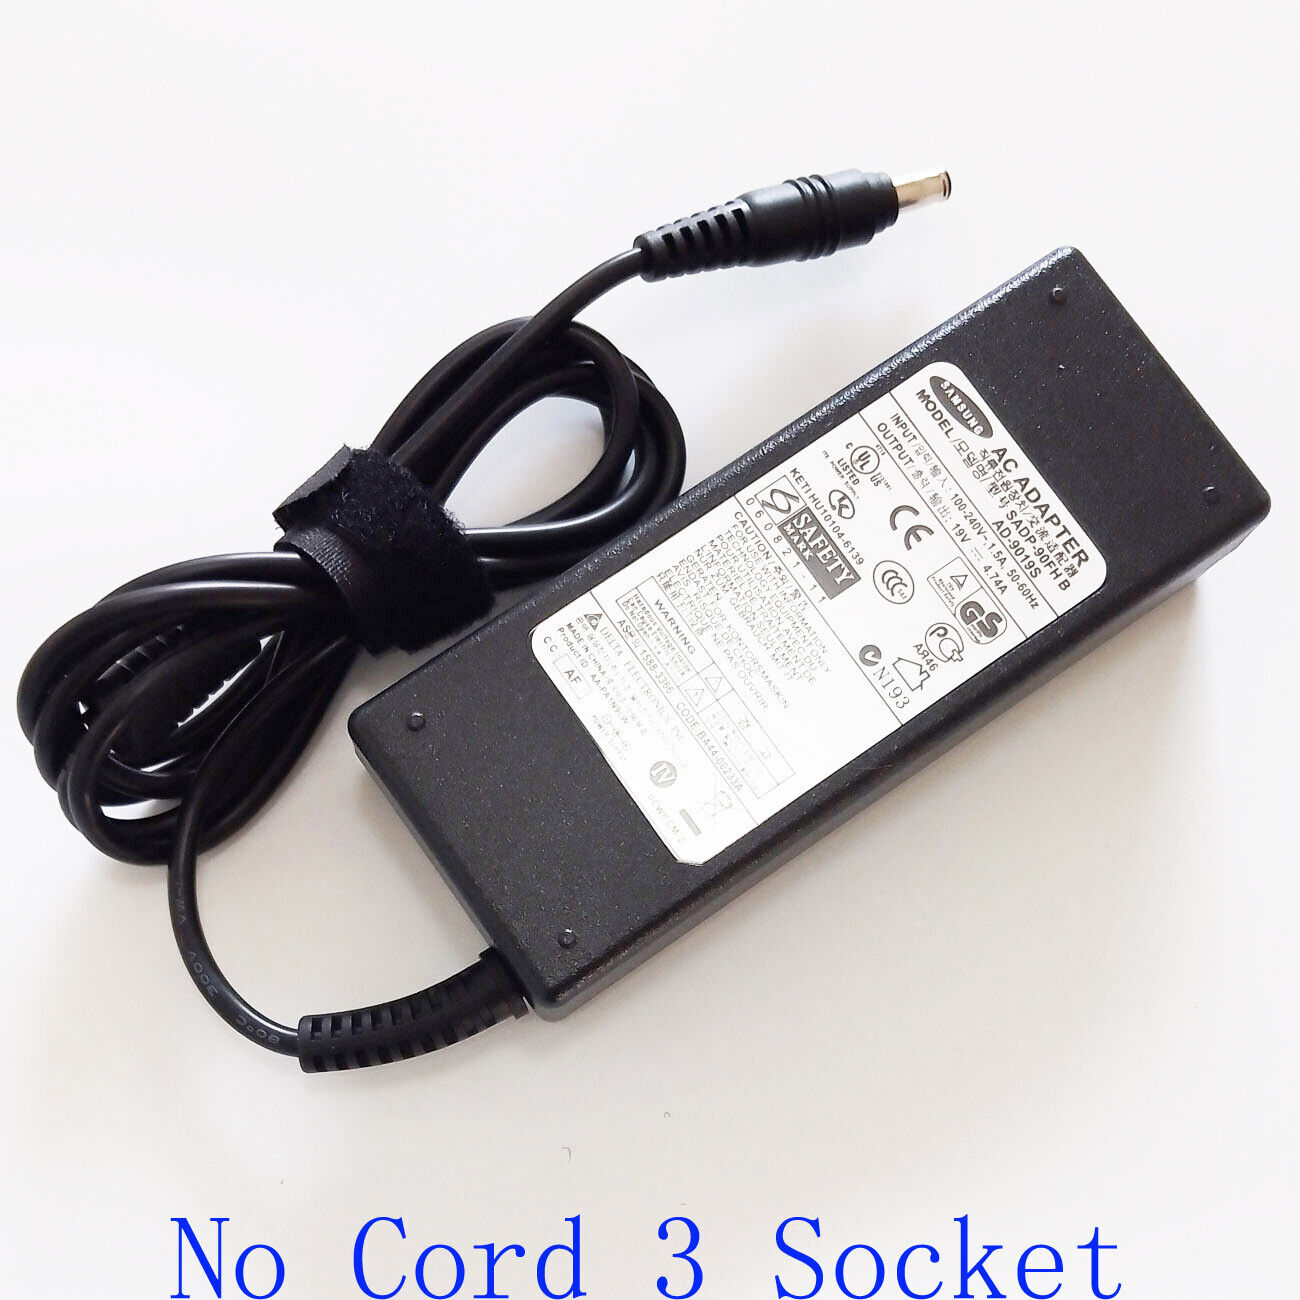 Genuine OEM AC Power Adapter Battery Charger For Samsung X15 X11 X12 X20 X22 X25